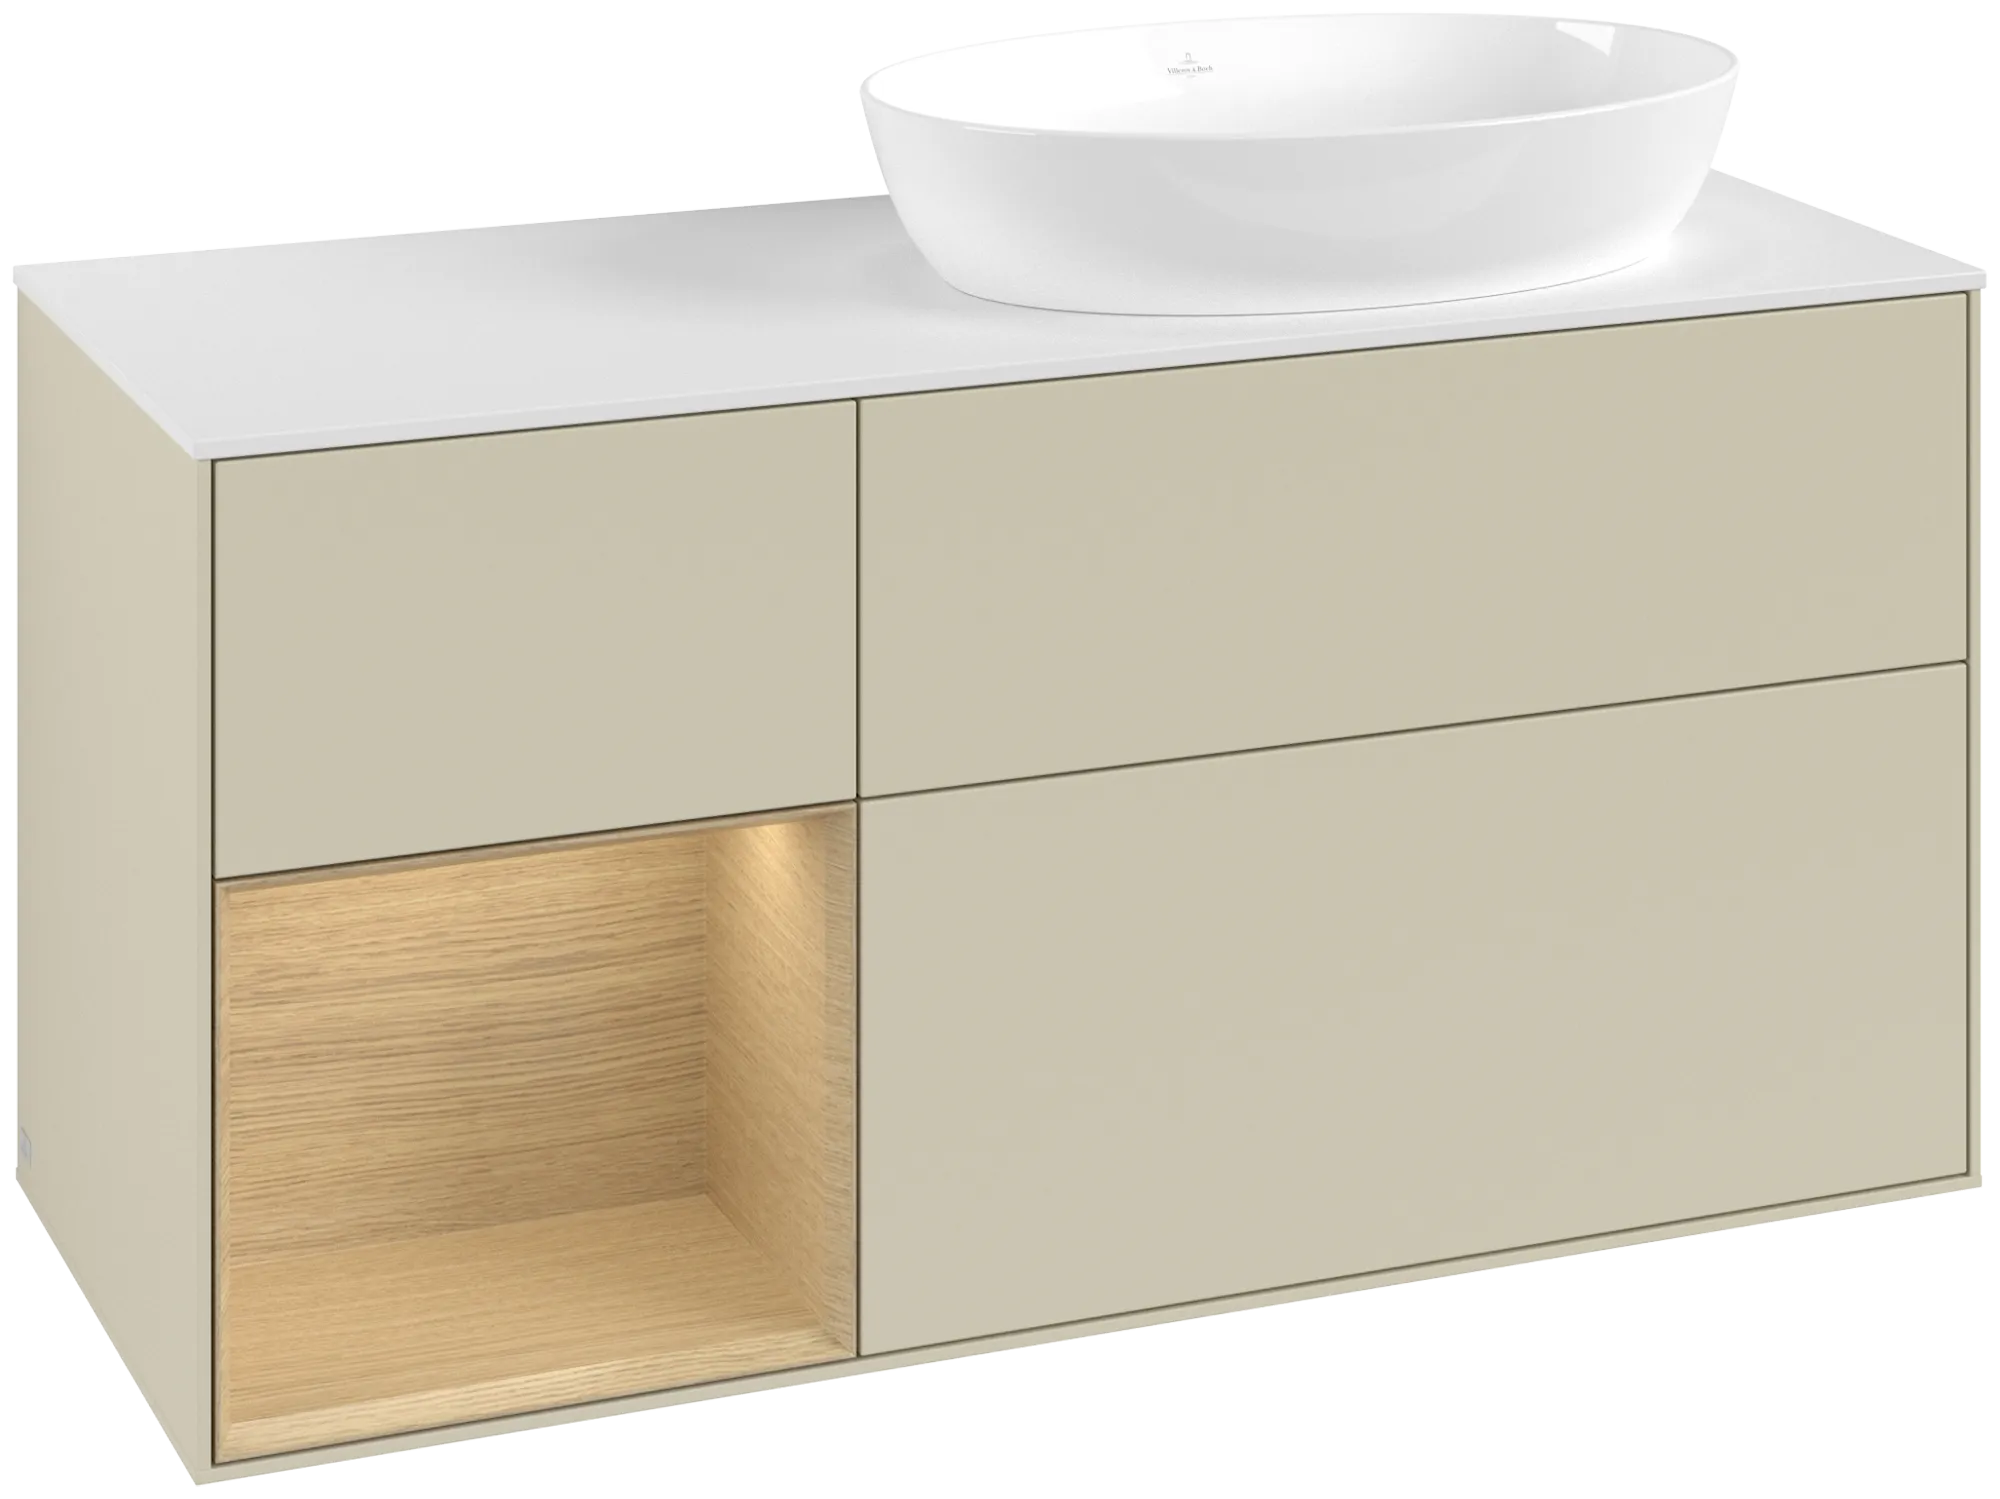 Picture of VILLEROY BOCH Finion Vanity unit, with lighting, 3 pull-out compartments, 1200 x 603 x 501 mm, Silk Grey Matt Lacquer / Oak Veneer / Glass White Matt #GA41PCHJ